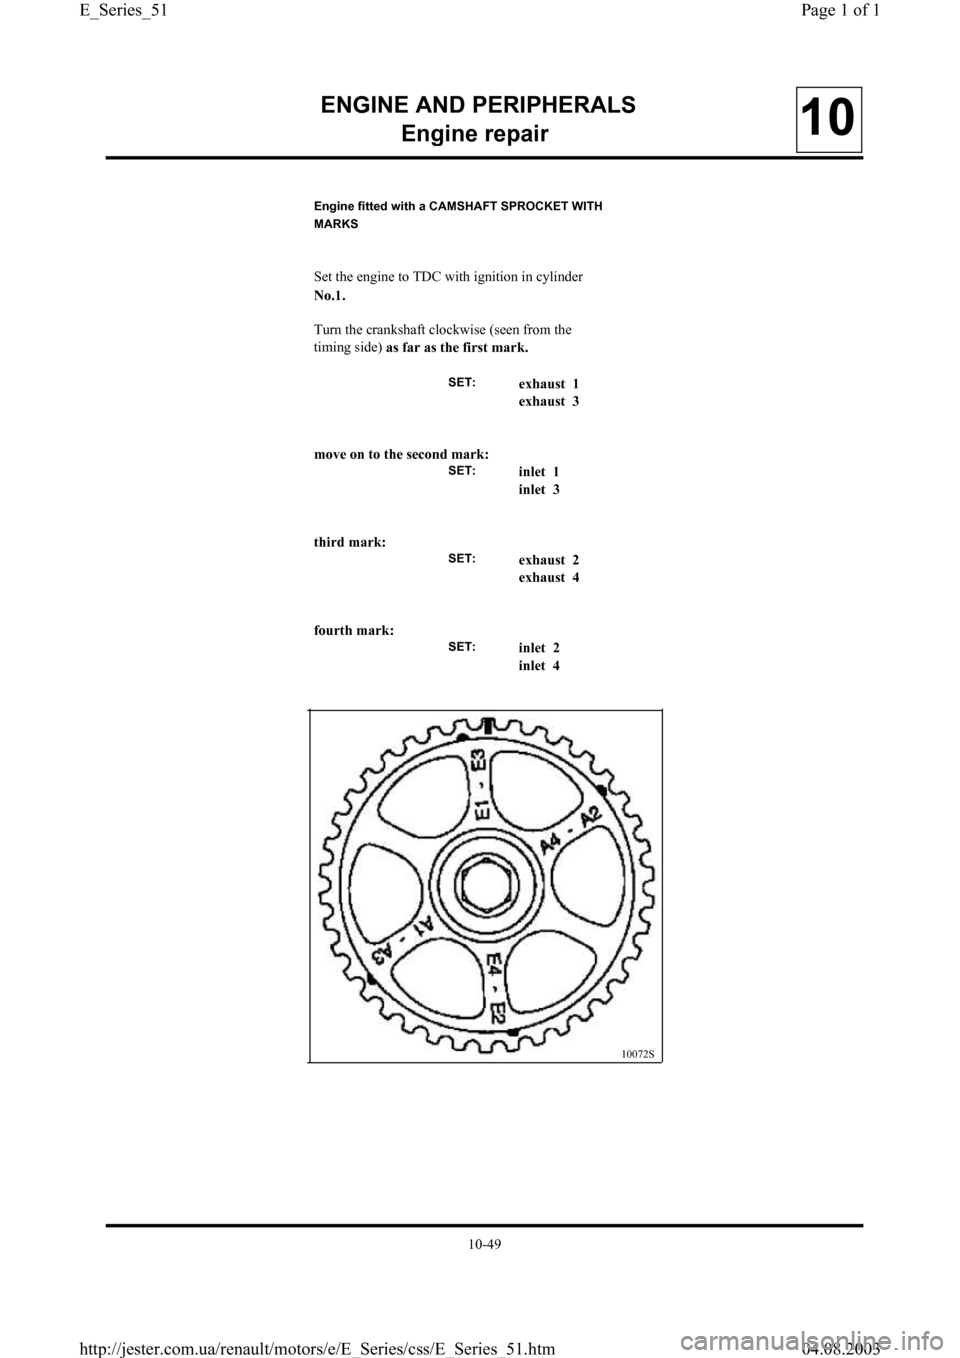 RENAULT CLIO 1997 X57 / 1.G Petrol Engines Repair Manual Engine fitted with a CAMSHAFT SPROCKET WITH
MARKS
Set the engine to TDC with ignition in cylinder
No.1.
Turn the crankshaft clockwise 
(seen from the
timing side) 
as far as the first mark.
SET:exhaus